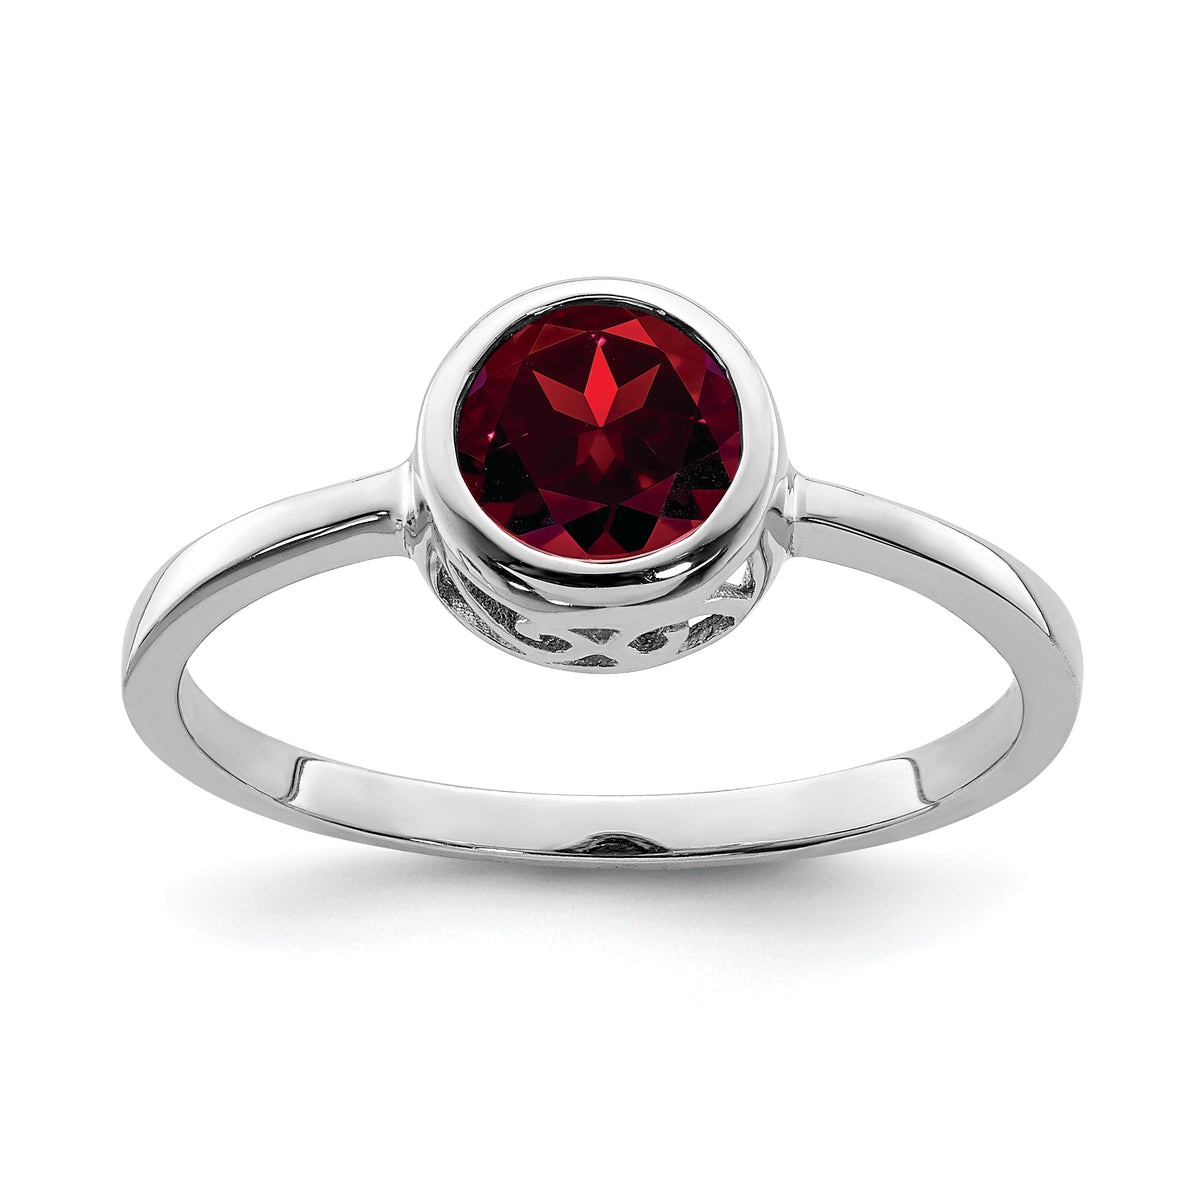 Sterling Silver Rhodium-plated Polished Garnet Round Ring